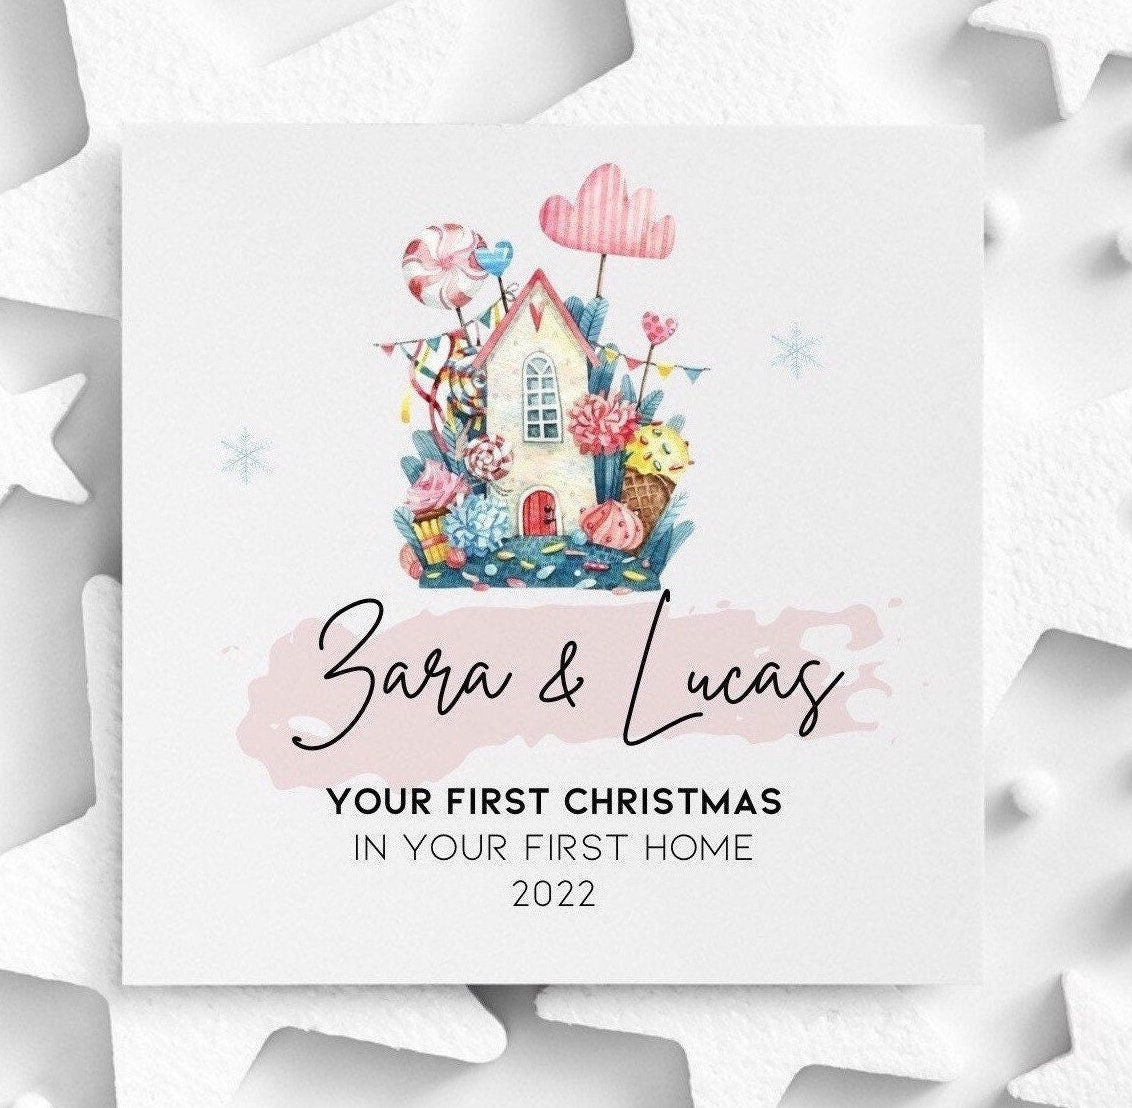 Your first Christmas In Your First Home Card for couples new home, daughter 1st Xmas in new house, first Christmas together card